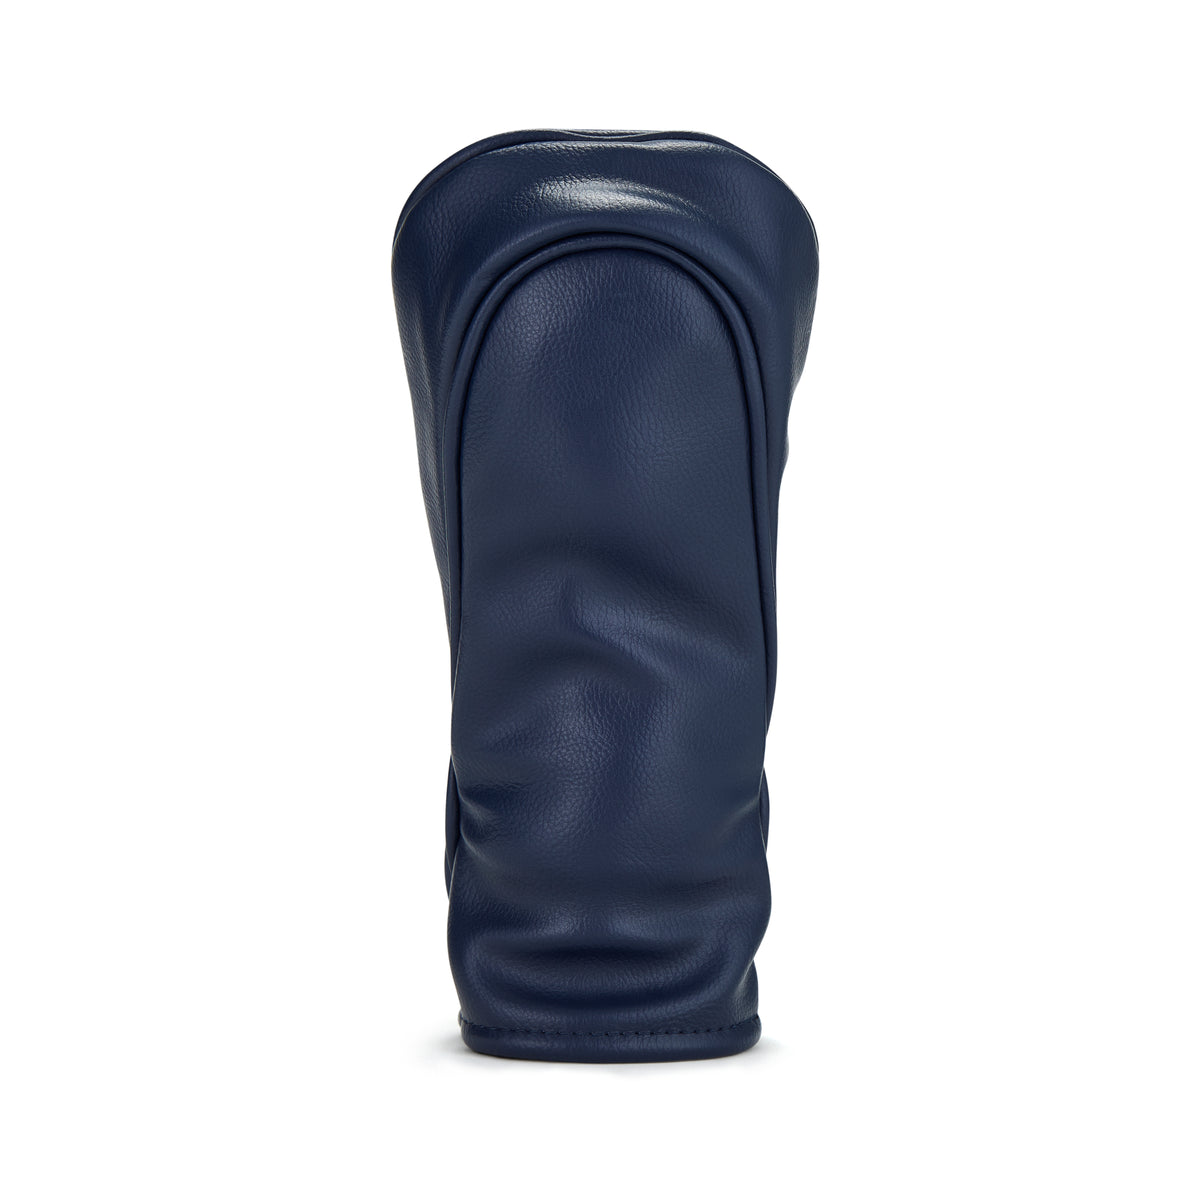 2023 Ryder Cup PRG Rescue Head Cover